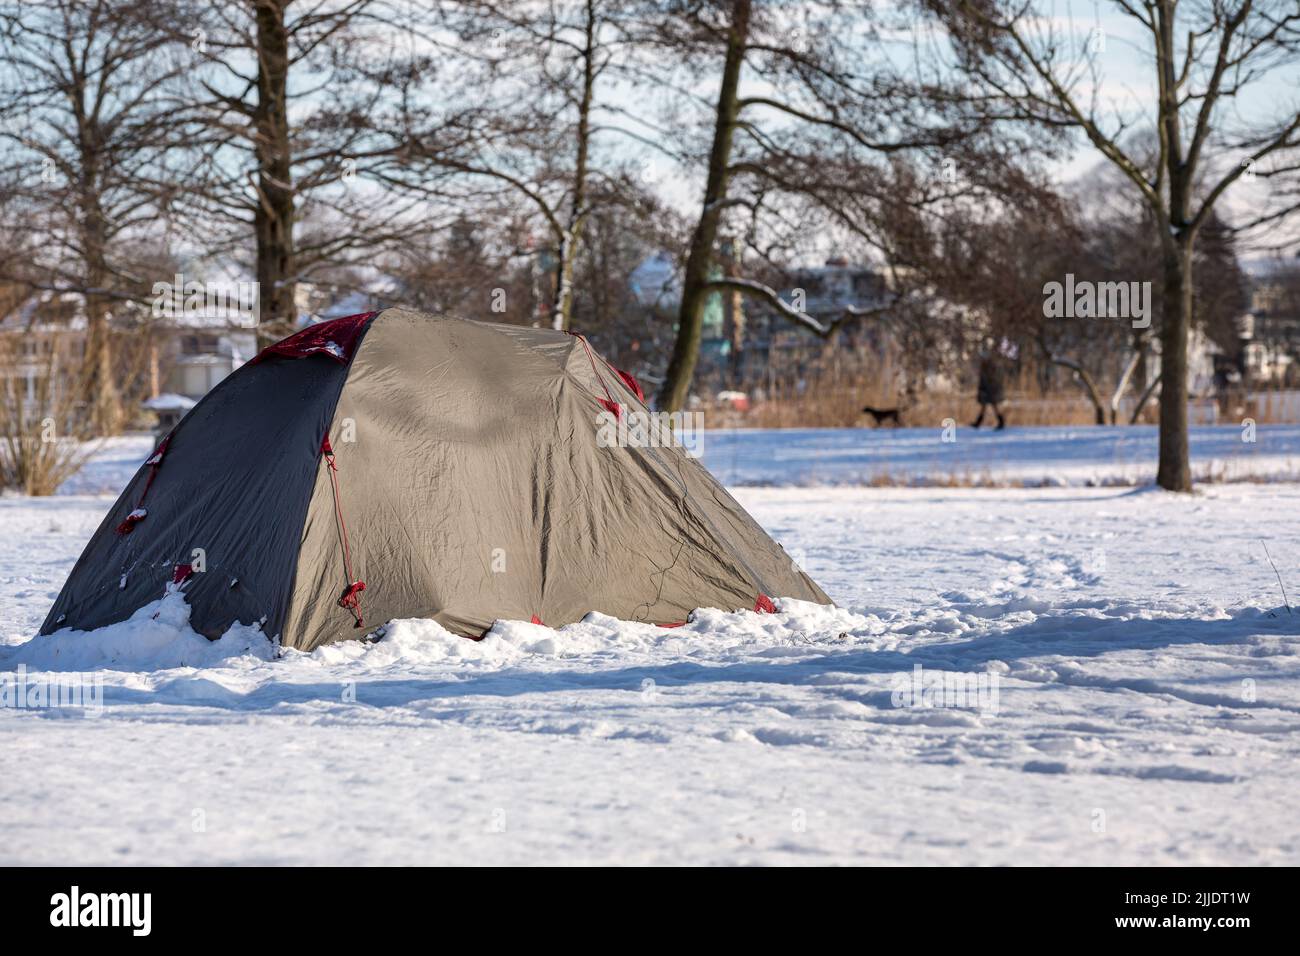 wild camping in the wintry Alsterpark in Hamburg Stock Photo